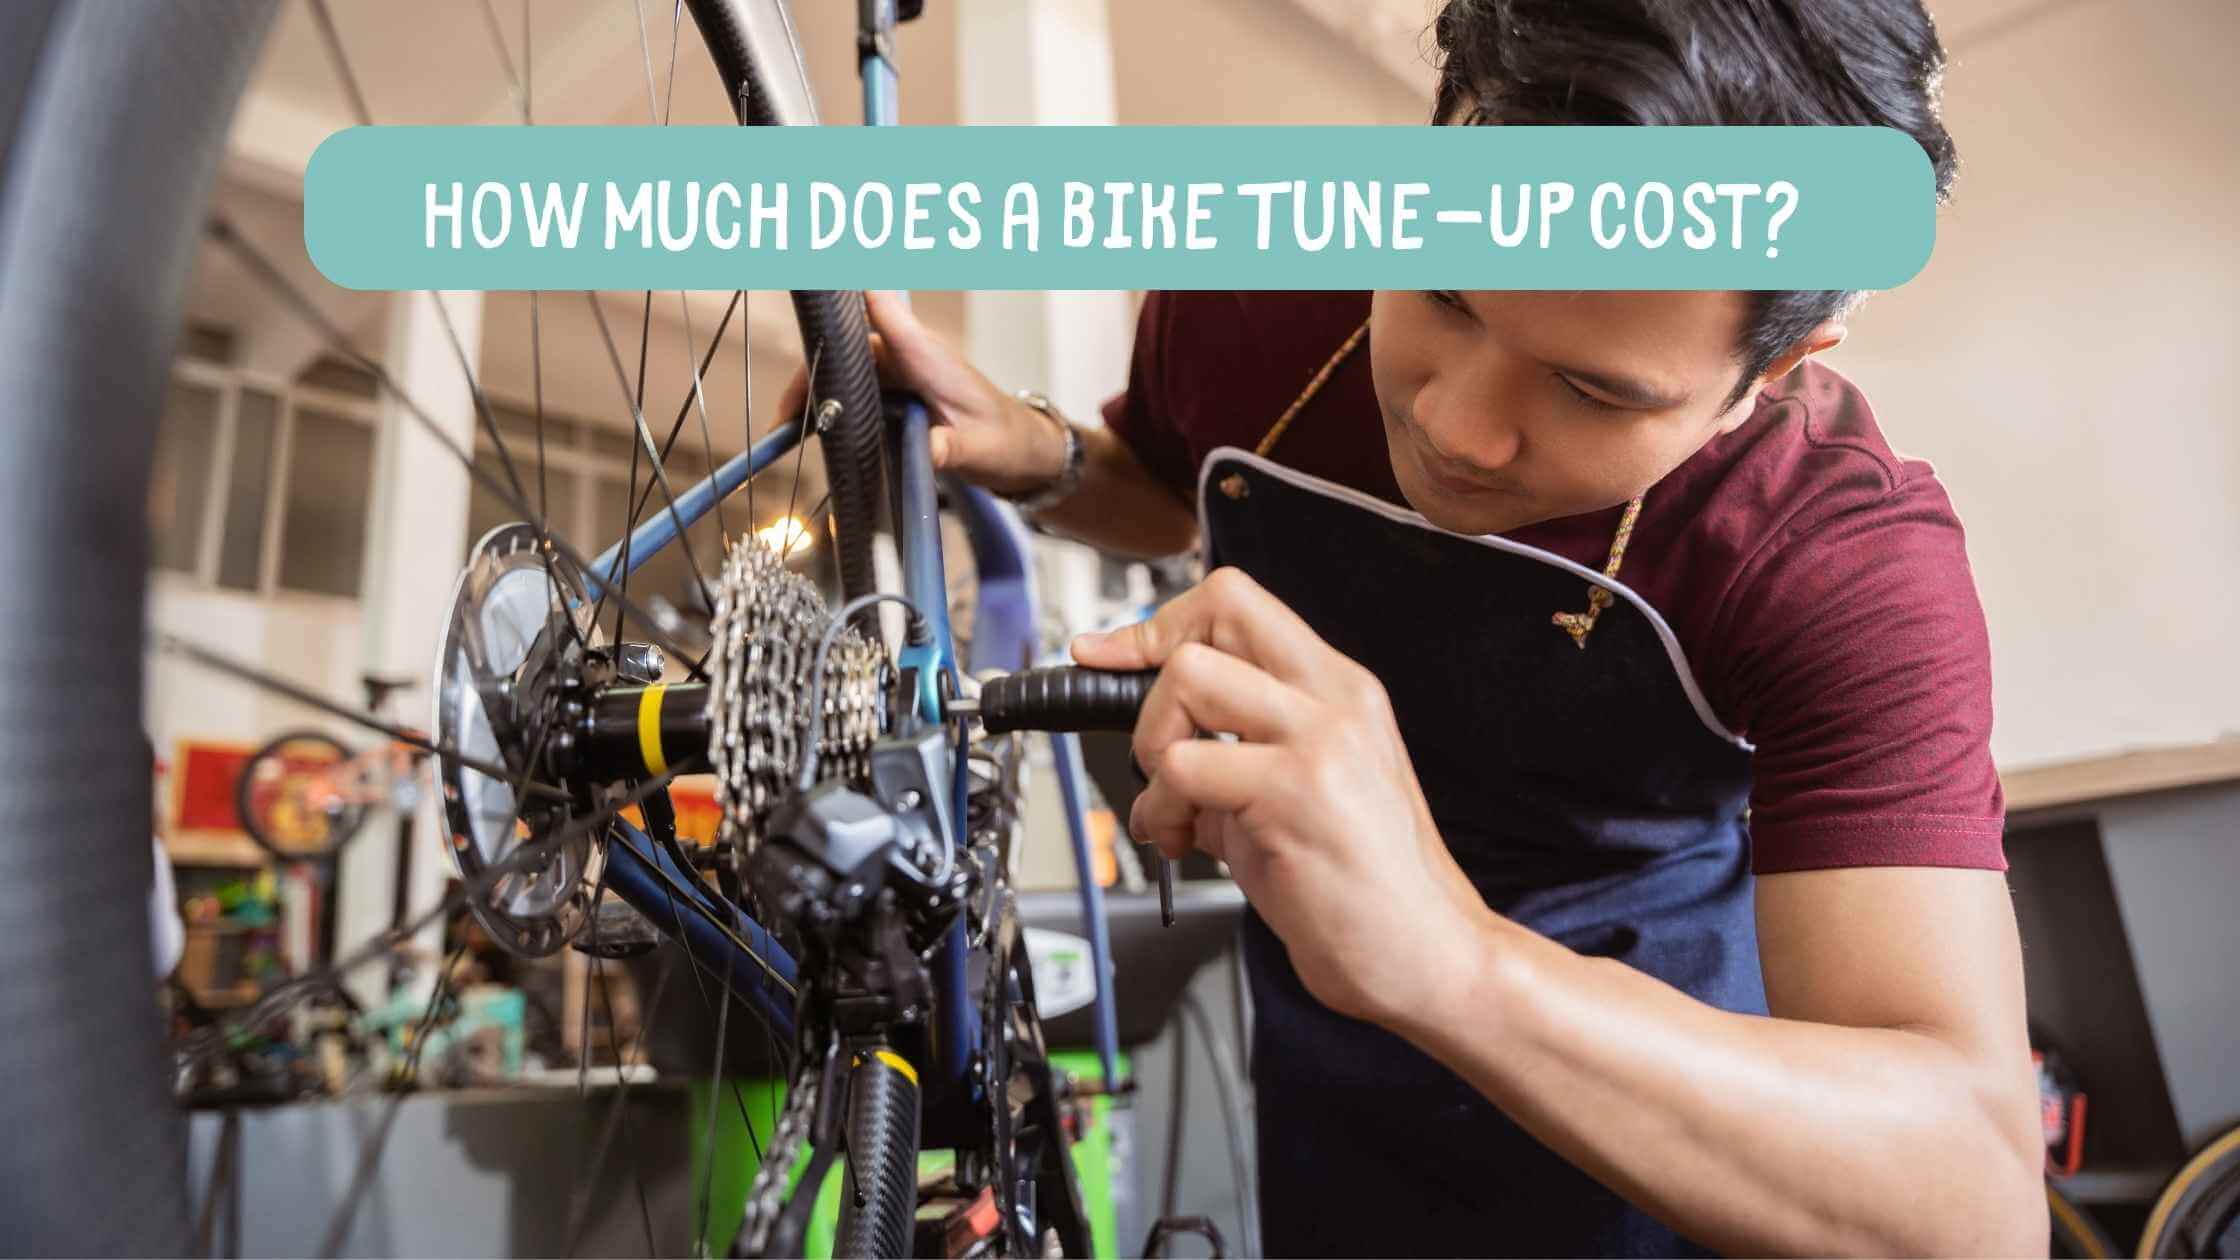 How Much Does a Bike Tune-Up Cost